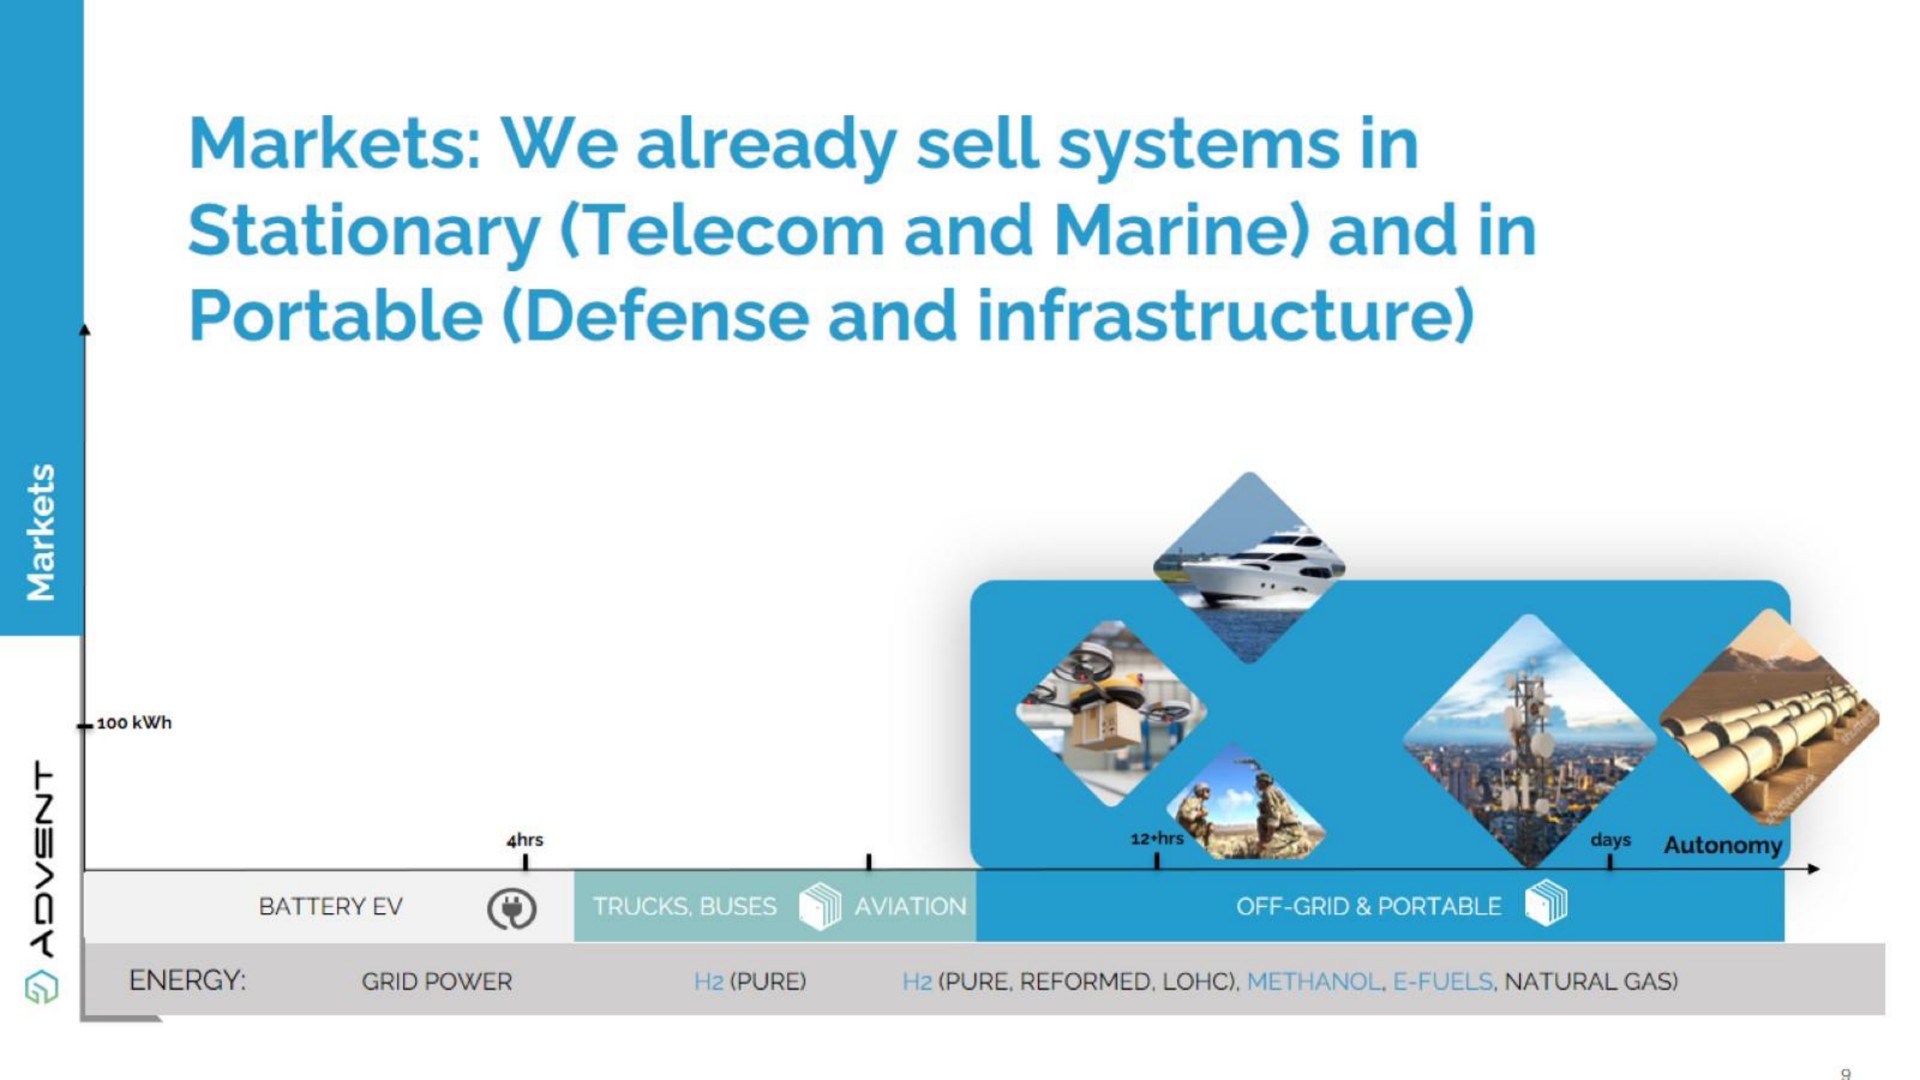 markets we already sell systems in stationary and marine and in portable defense and infrastructure | Advent